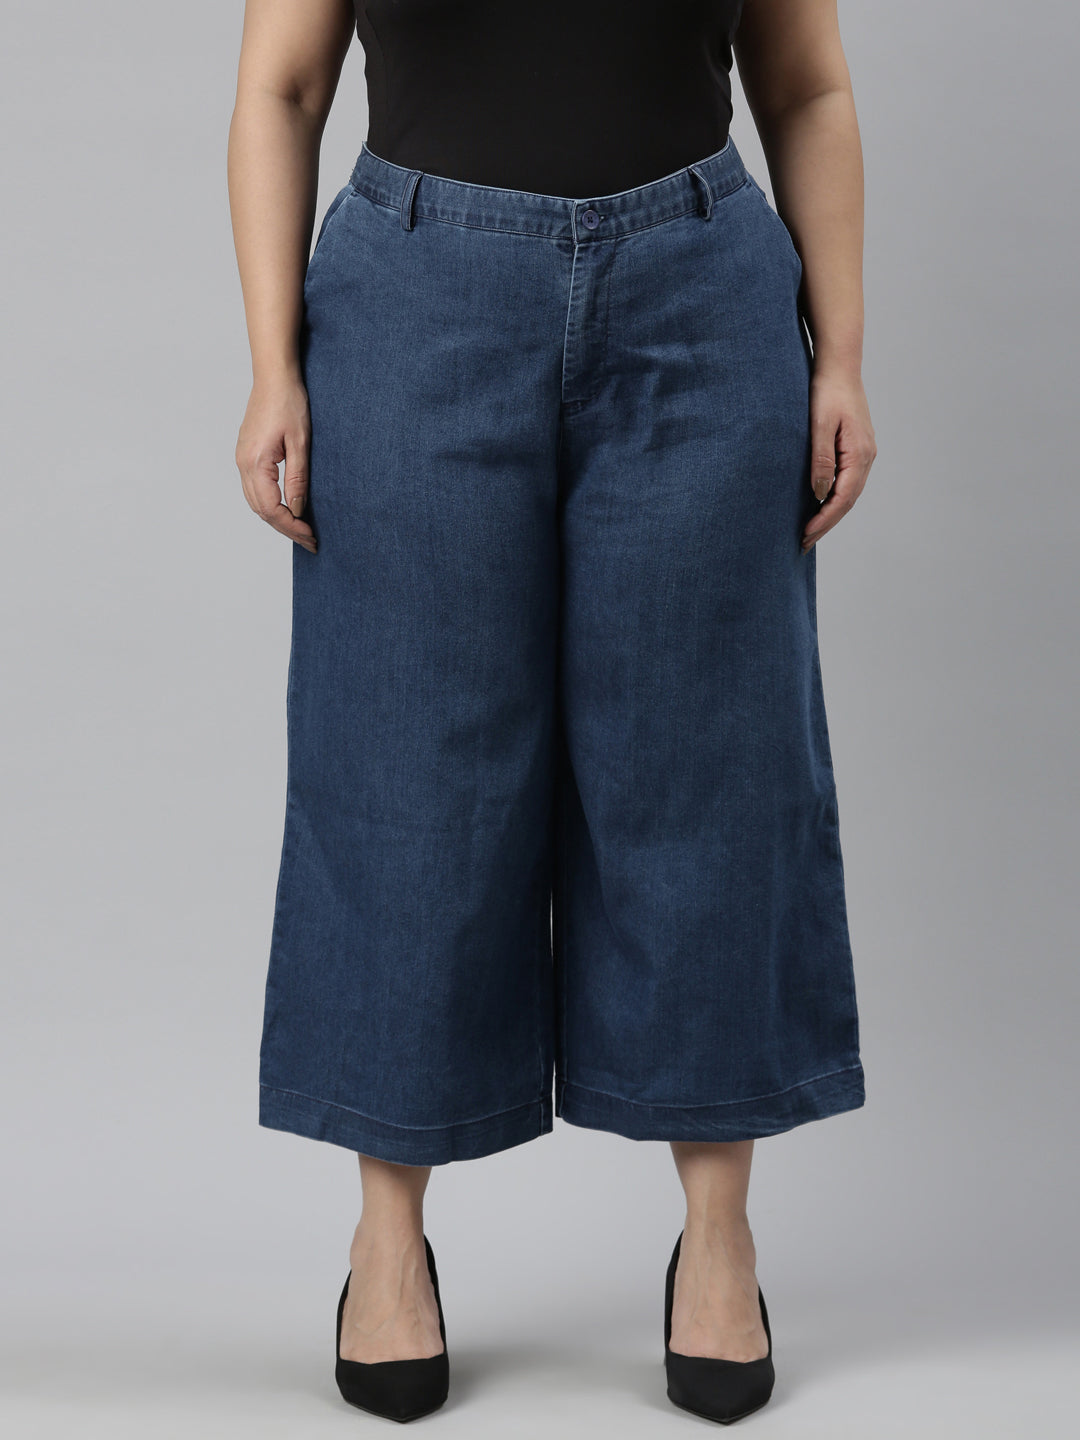 Stylish Linen Culottes for Women with Side Pockets - Go Colors